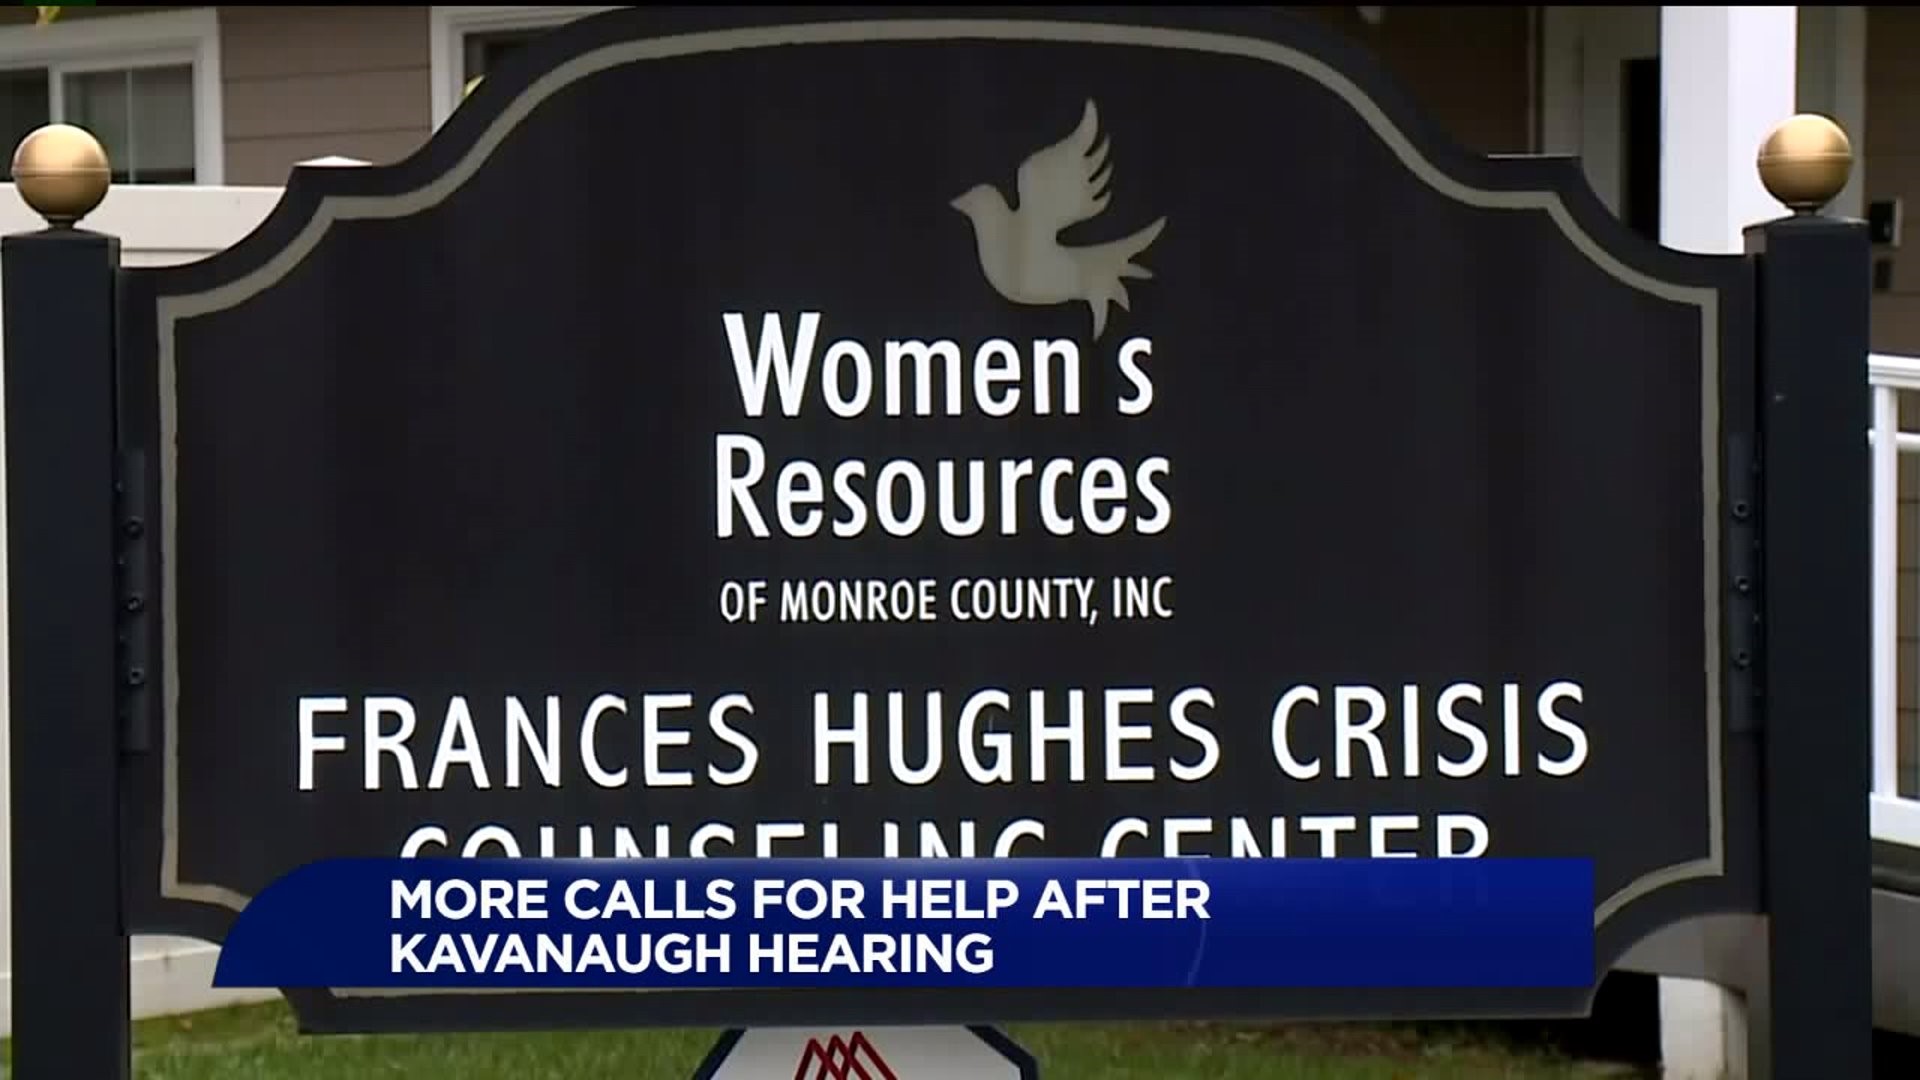 More Calls for Help after Kavanaugh Hearing